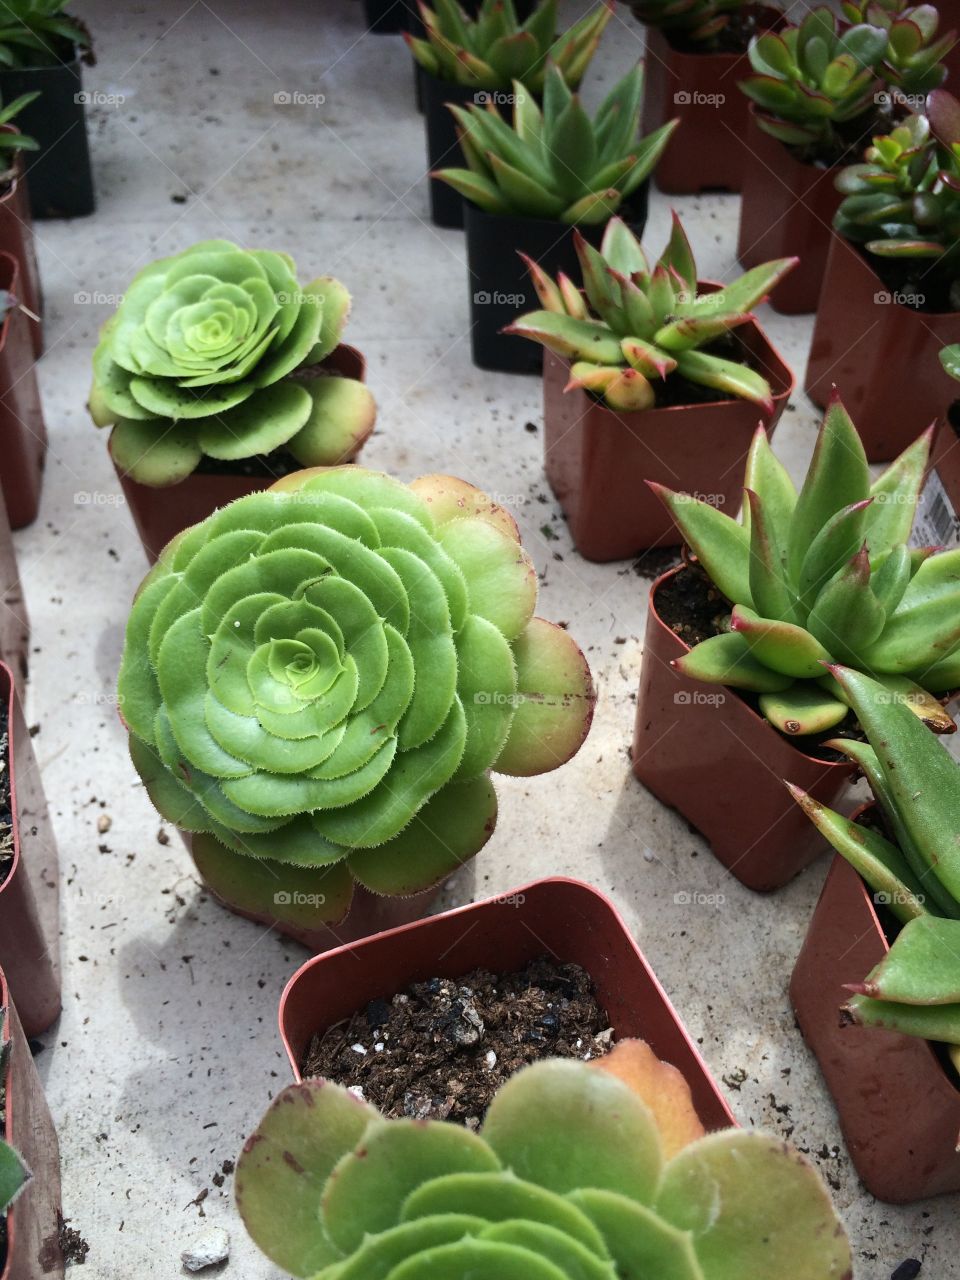 Nursery green succulents. Small young plant. Green circular geometric shape and clustered plant. Great for any garden lover or hipster. Similar to cactus